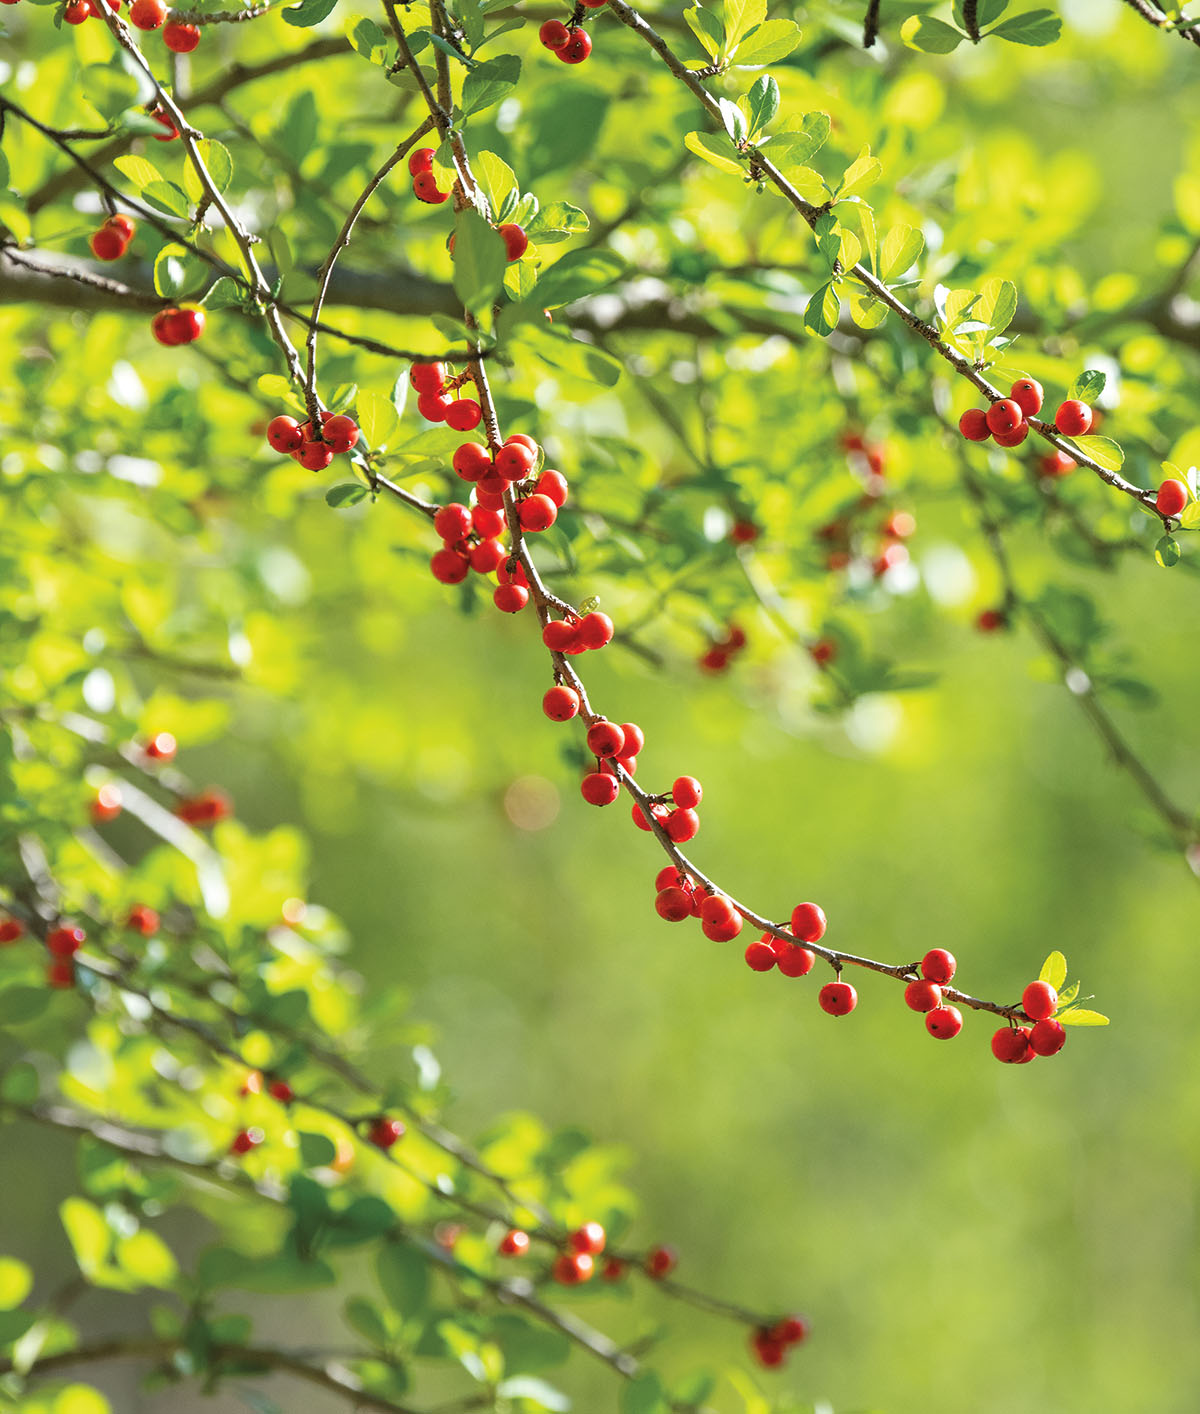 Bright red berries on a tree limb in front of a green canopy background